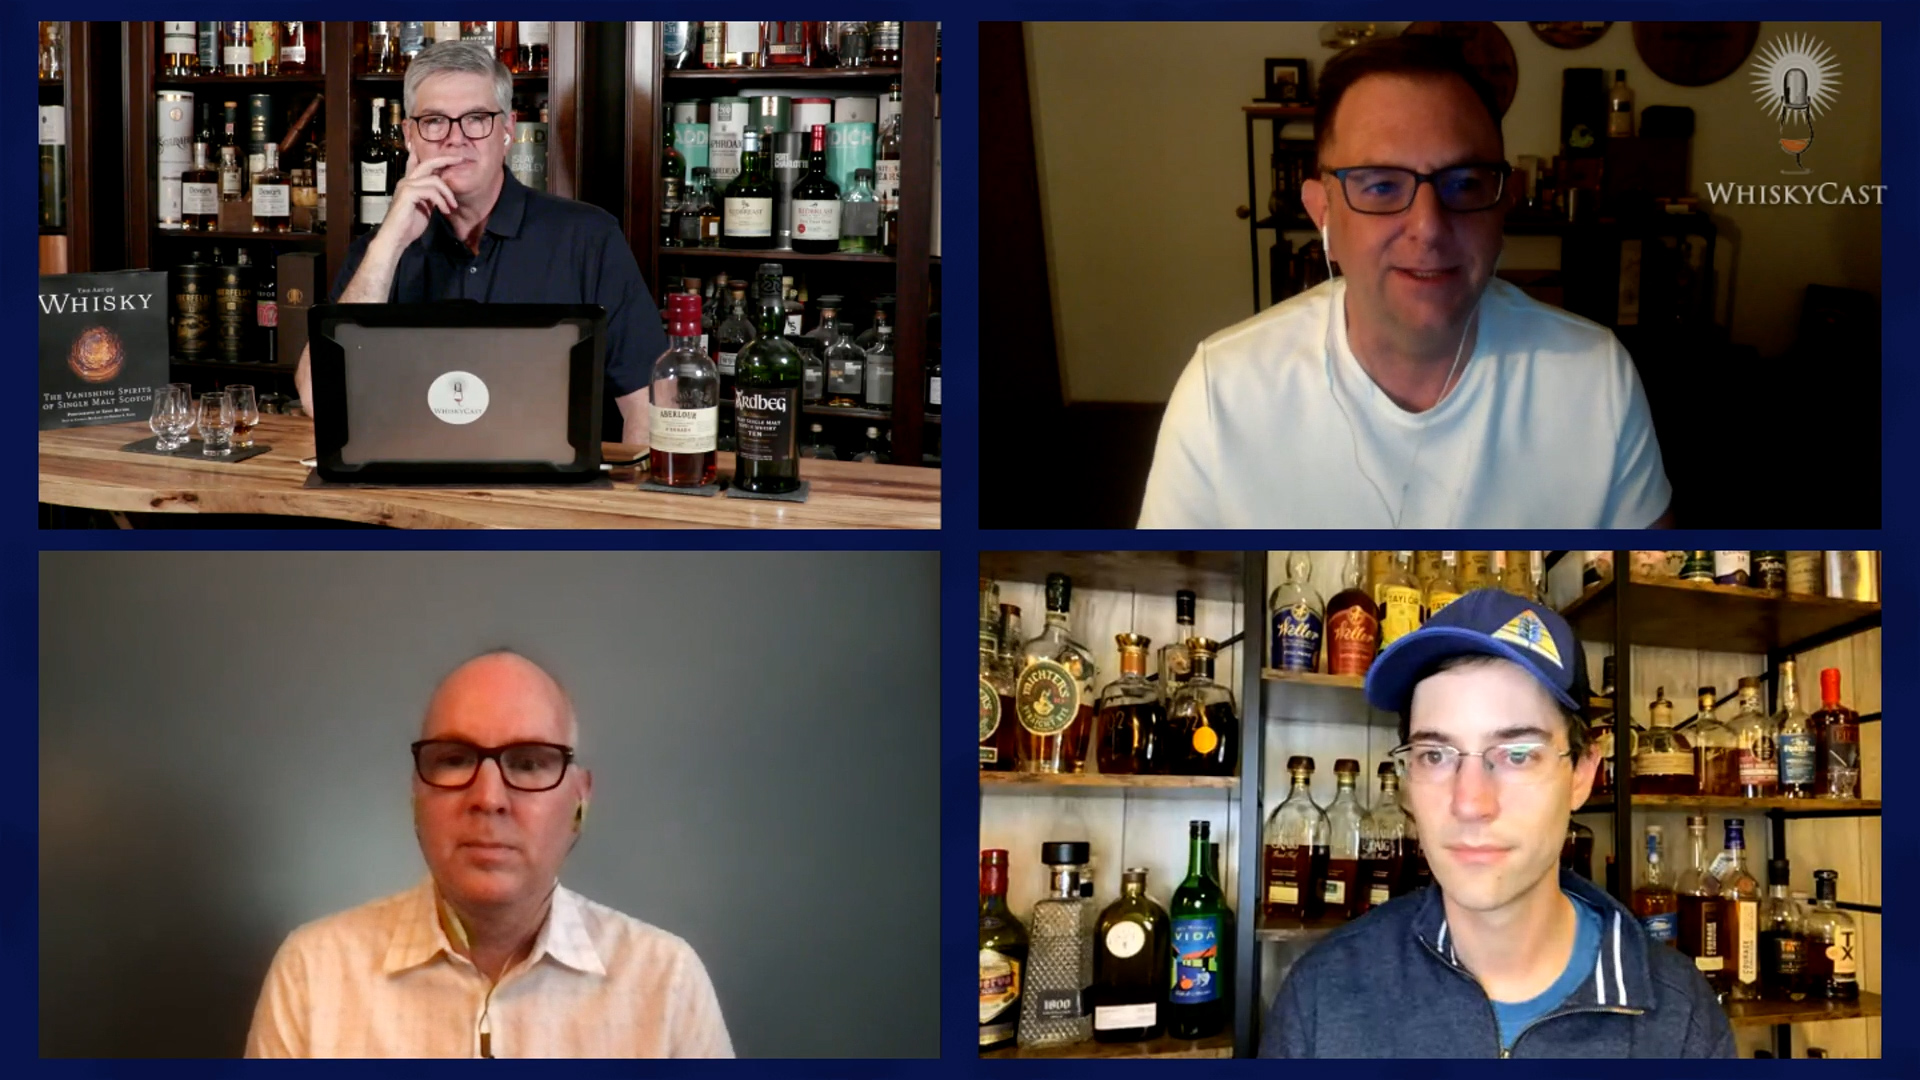 Whisky writers Nino Kilgore-Marchetti and Kyle Swartz joined us on the latest #HappyHourLive webcast, along with photographer Ernie Button. His new book "The Art of Whisky" comes out this week, and we're giving a copy to one of our webcast viewers!